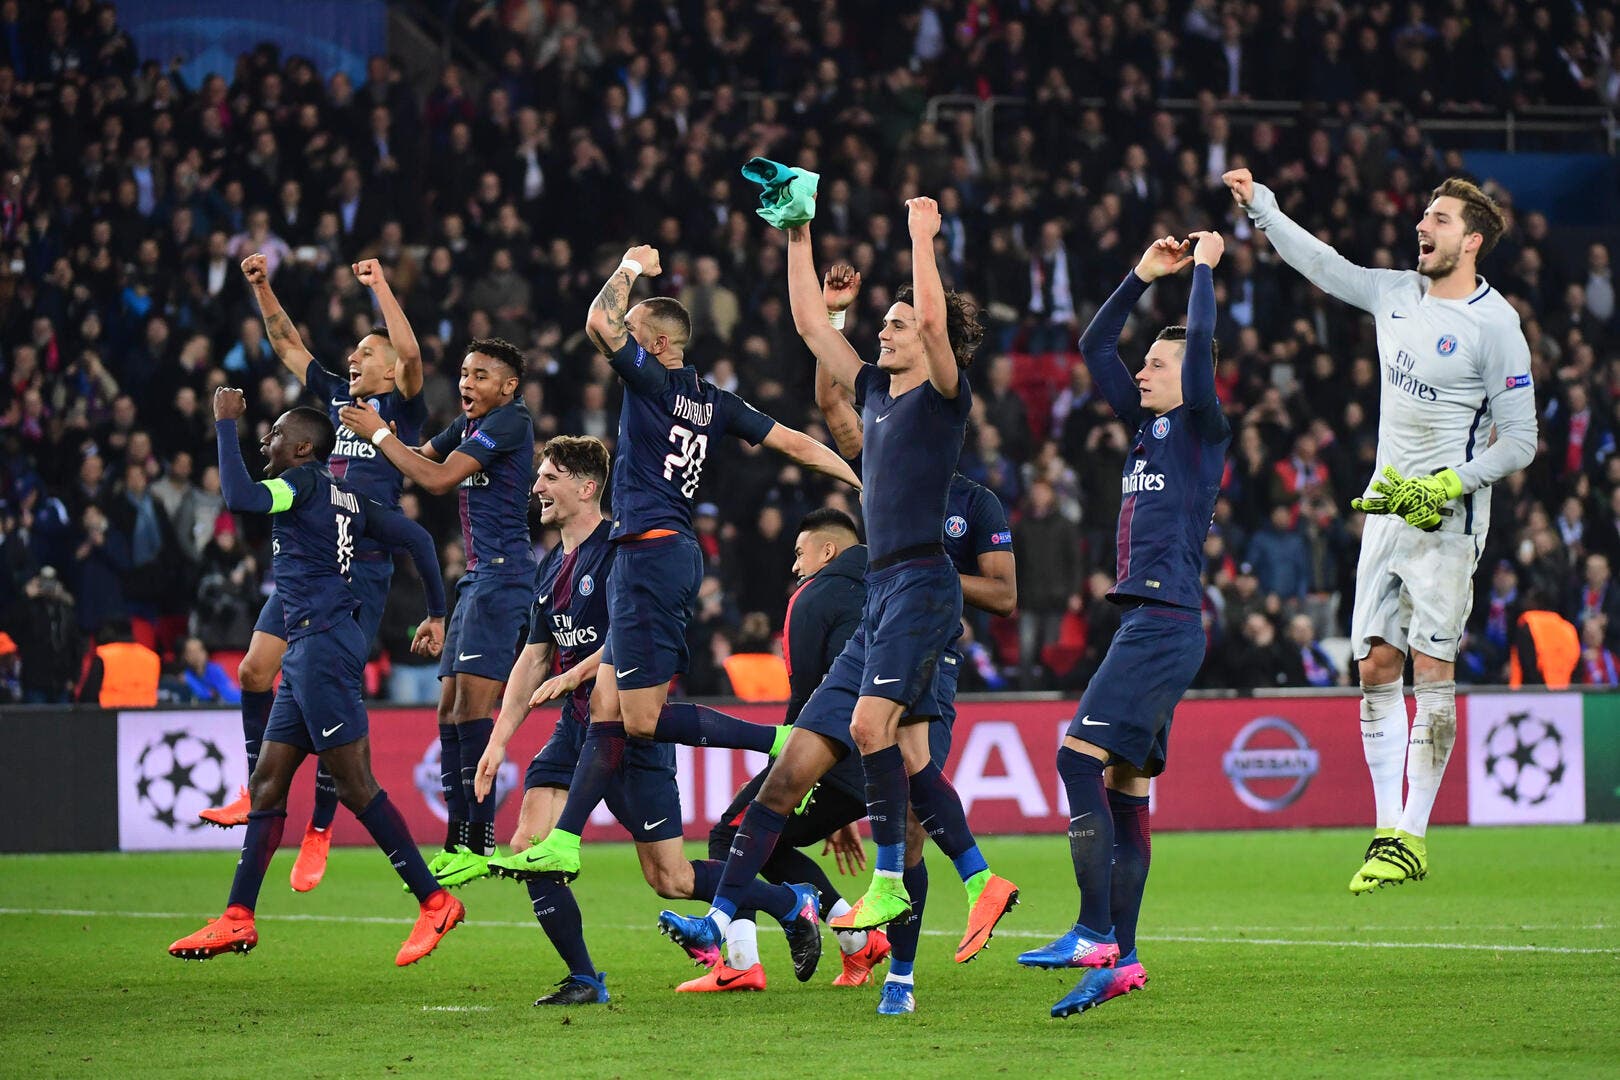 Psg Today Match Photos The french forward once again